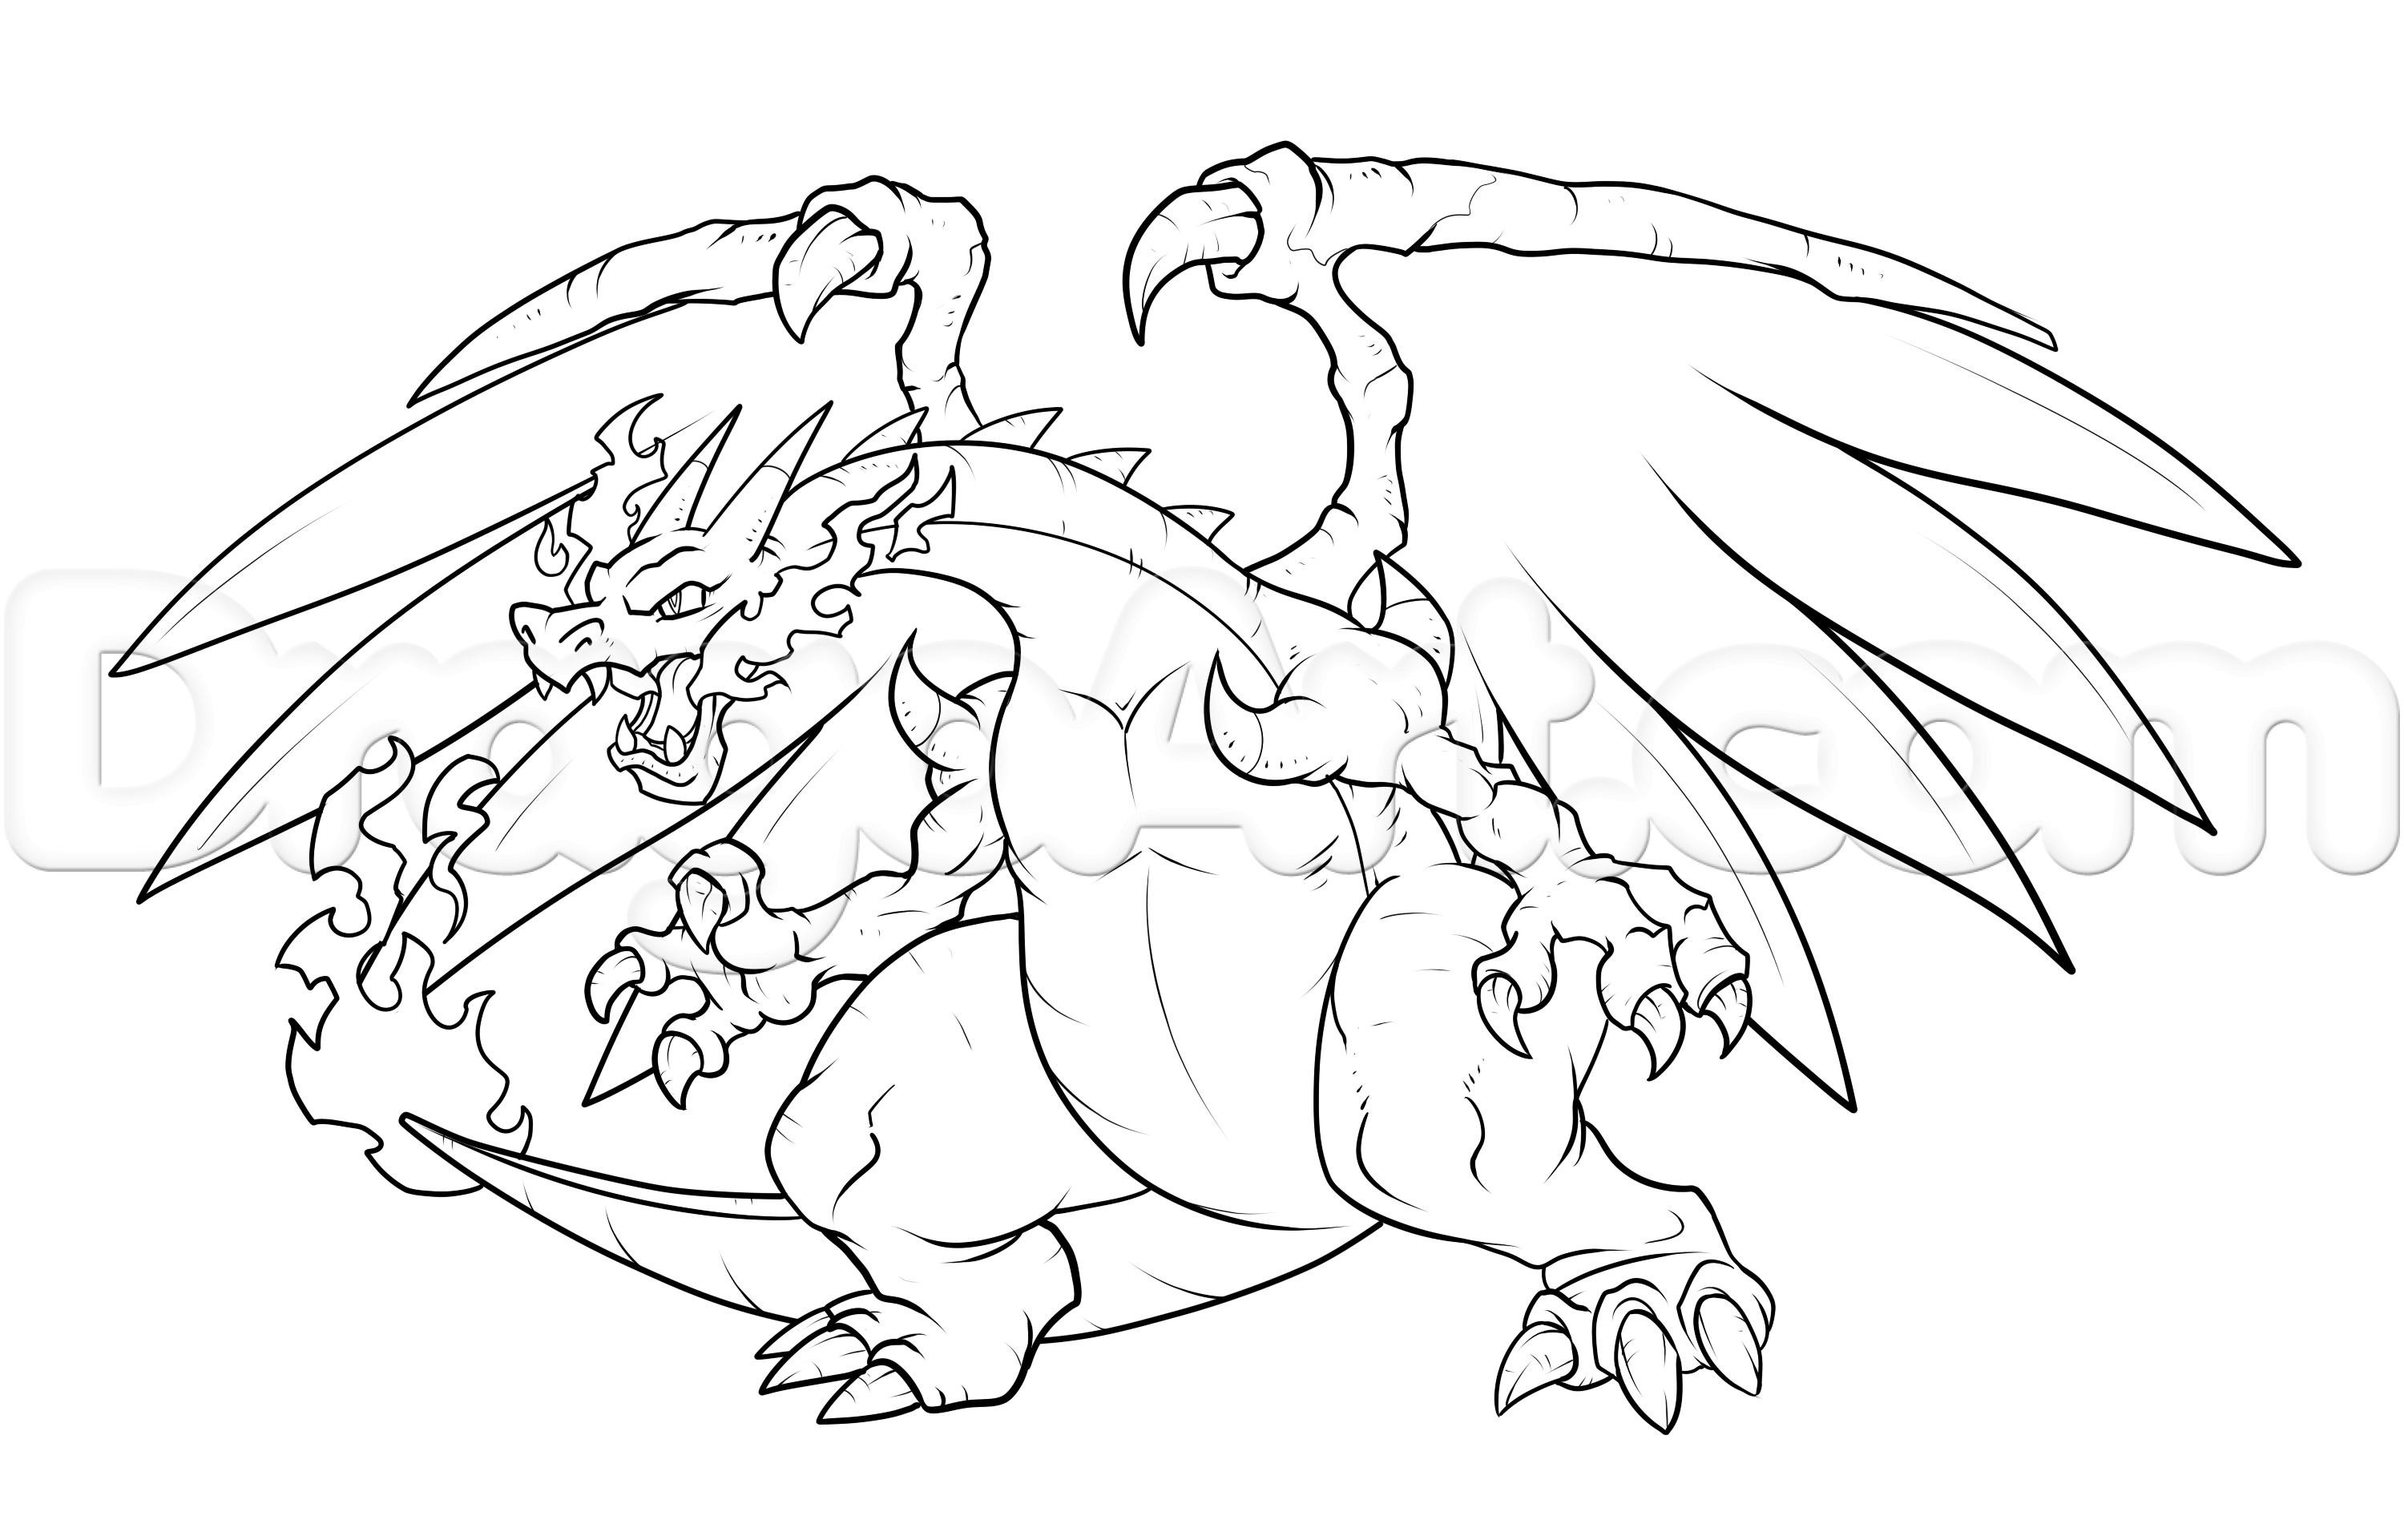 pokemon-coloring-pages-mega-charizard-ex-of-pokemon-coloring-pages-mega-charizard-ex Pokemon Coloring Pages Mega Charizard Ex Cartoon 